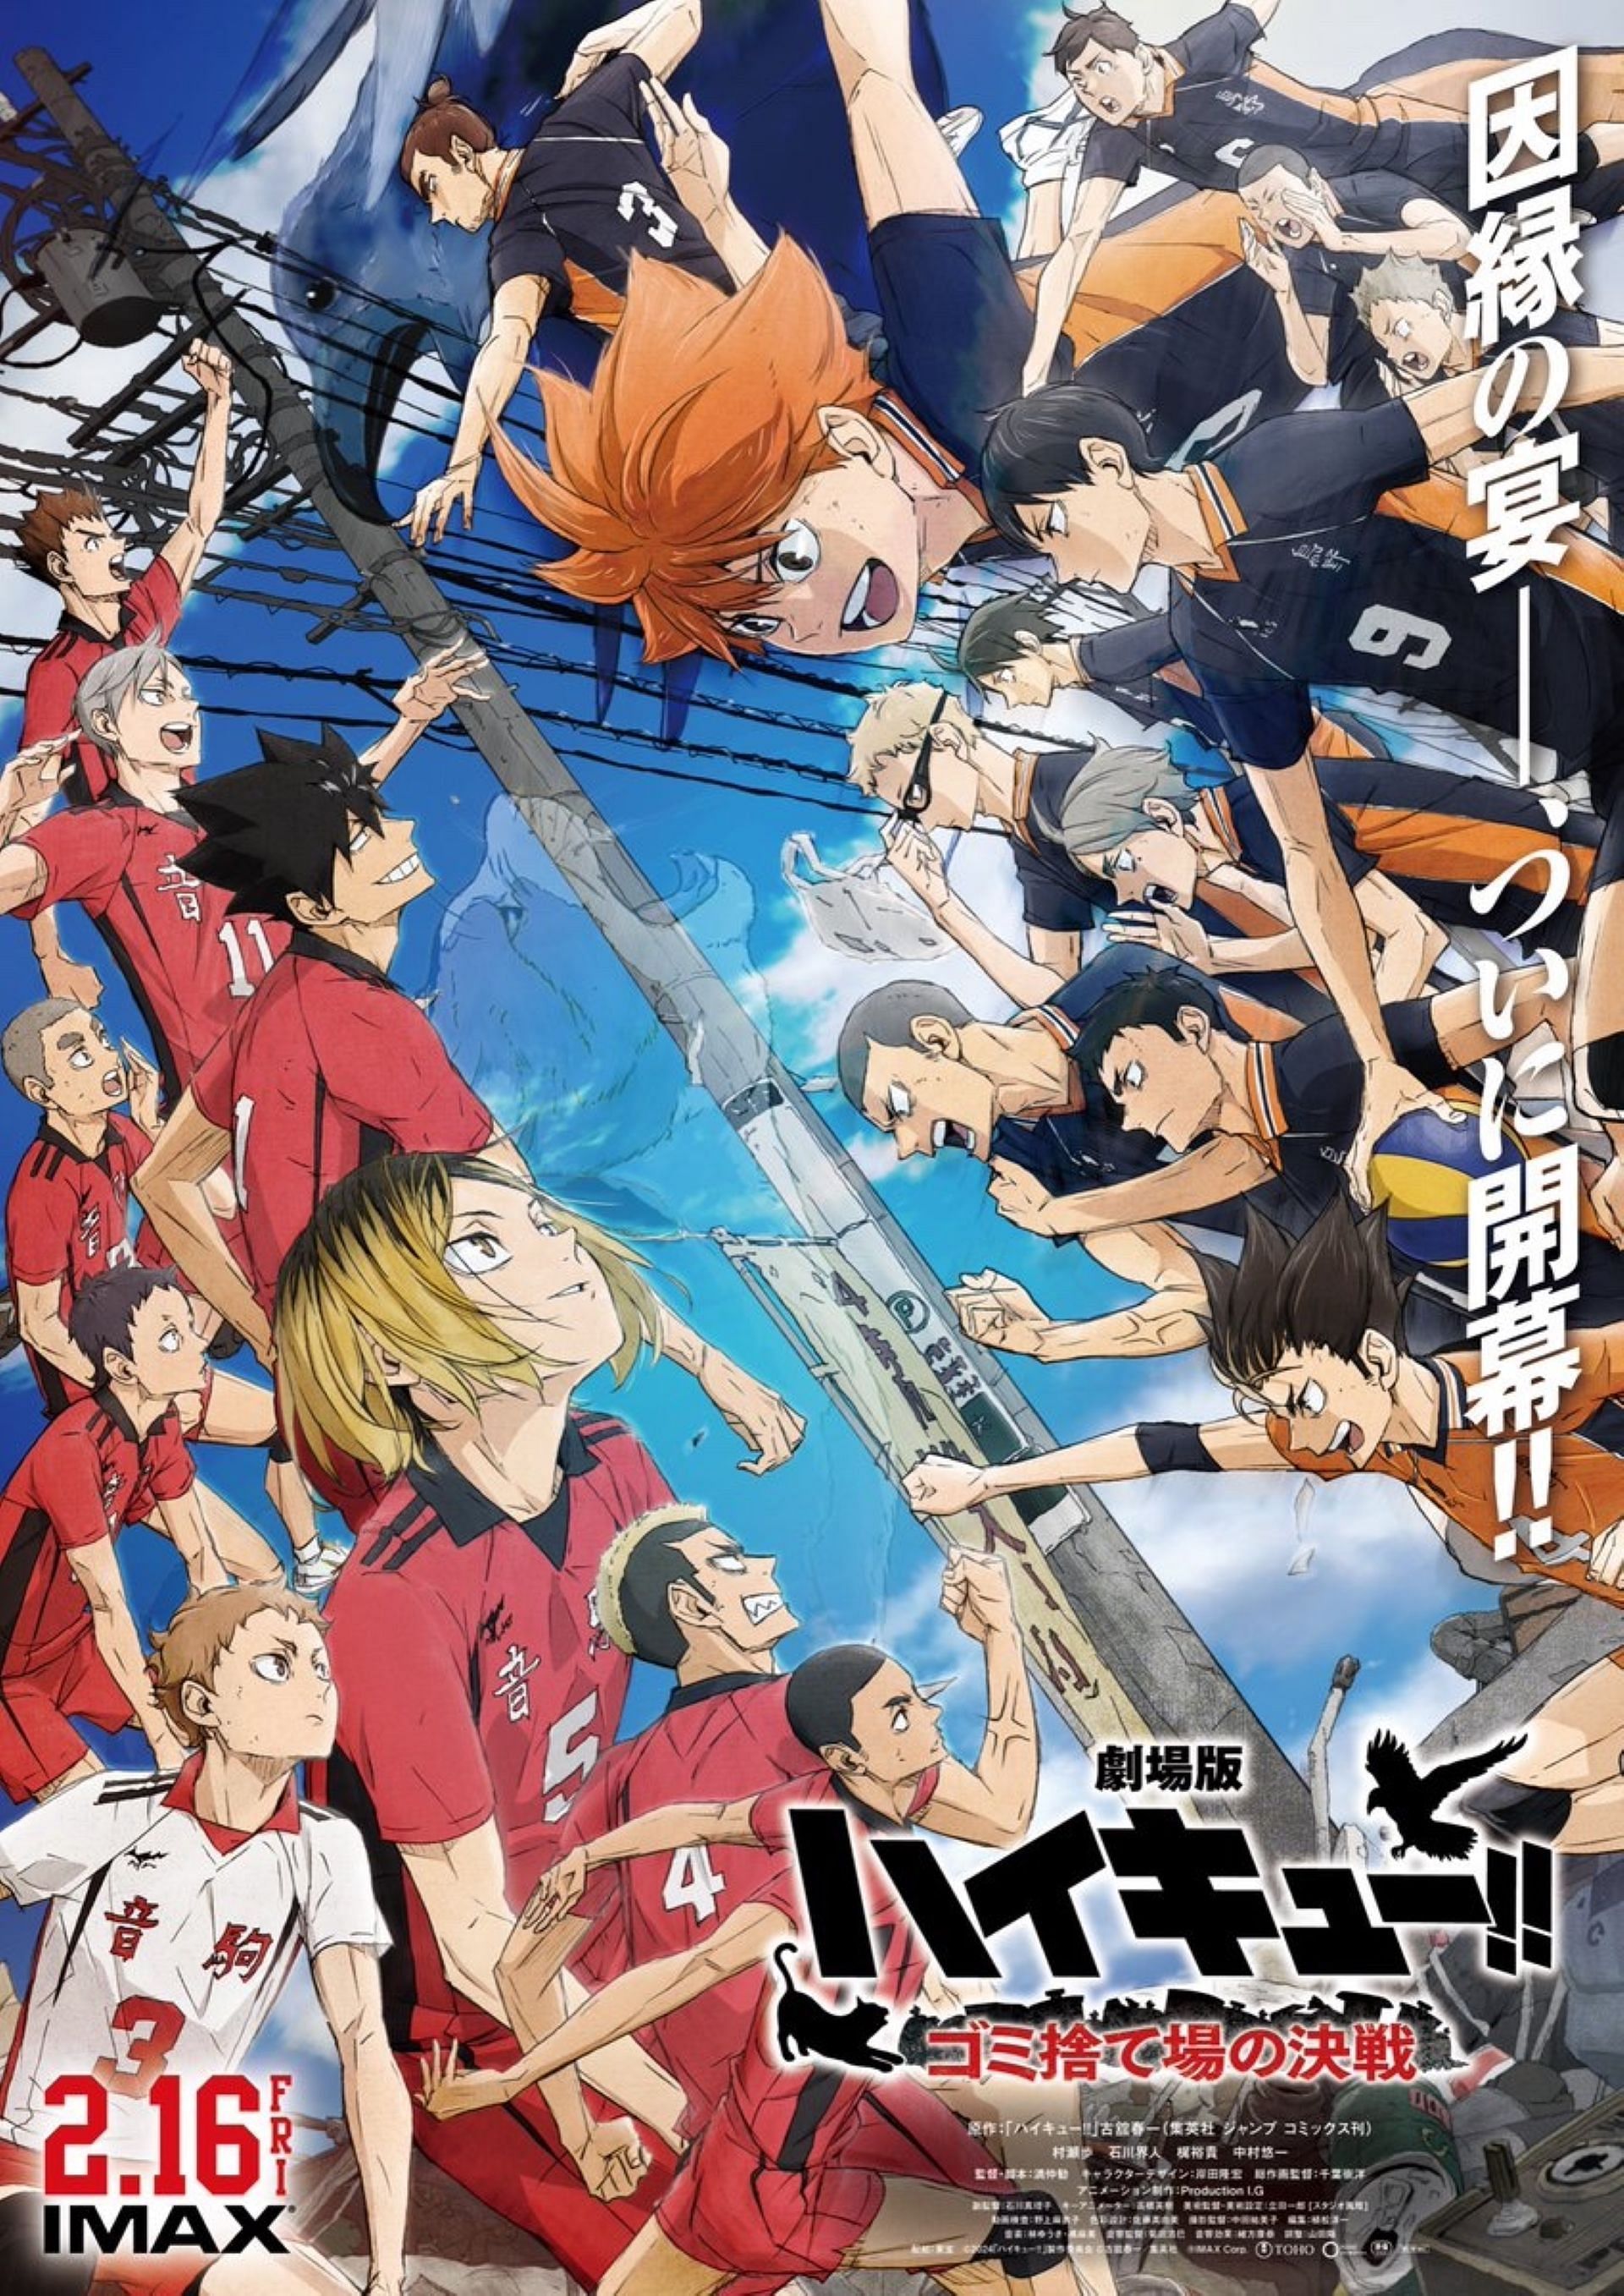 Does someone know where I can get the banner? : r/haikyuu